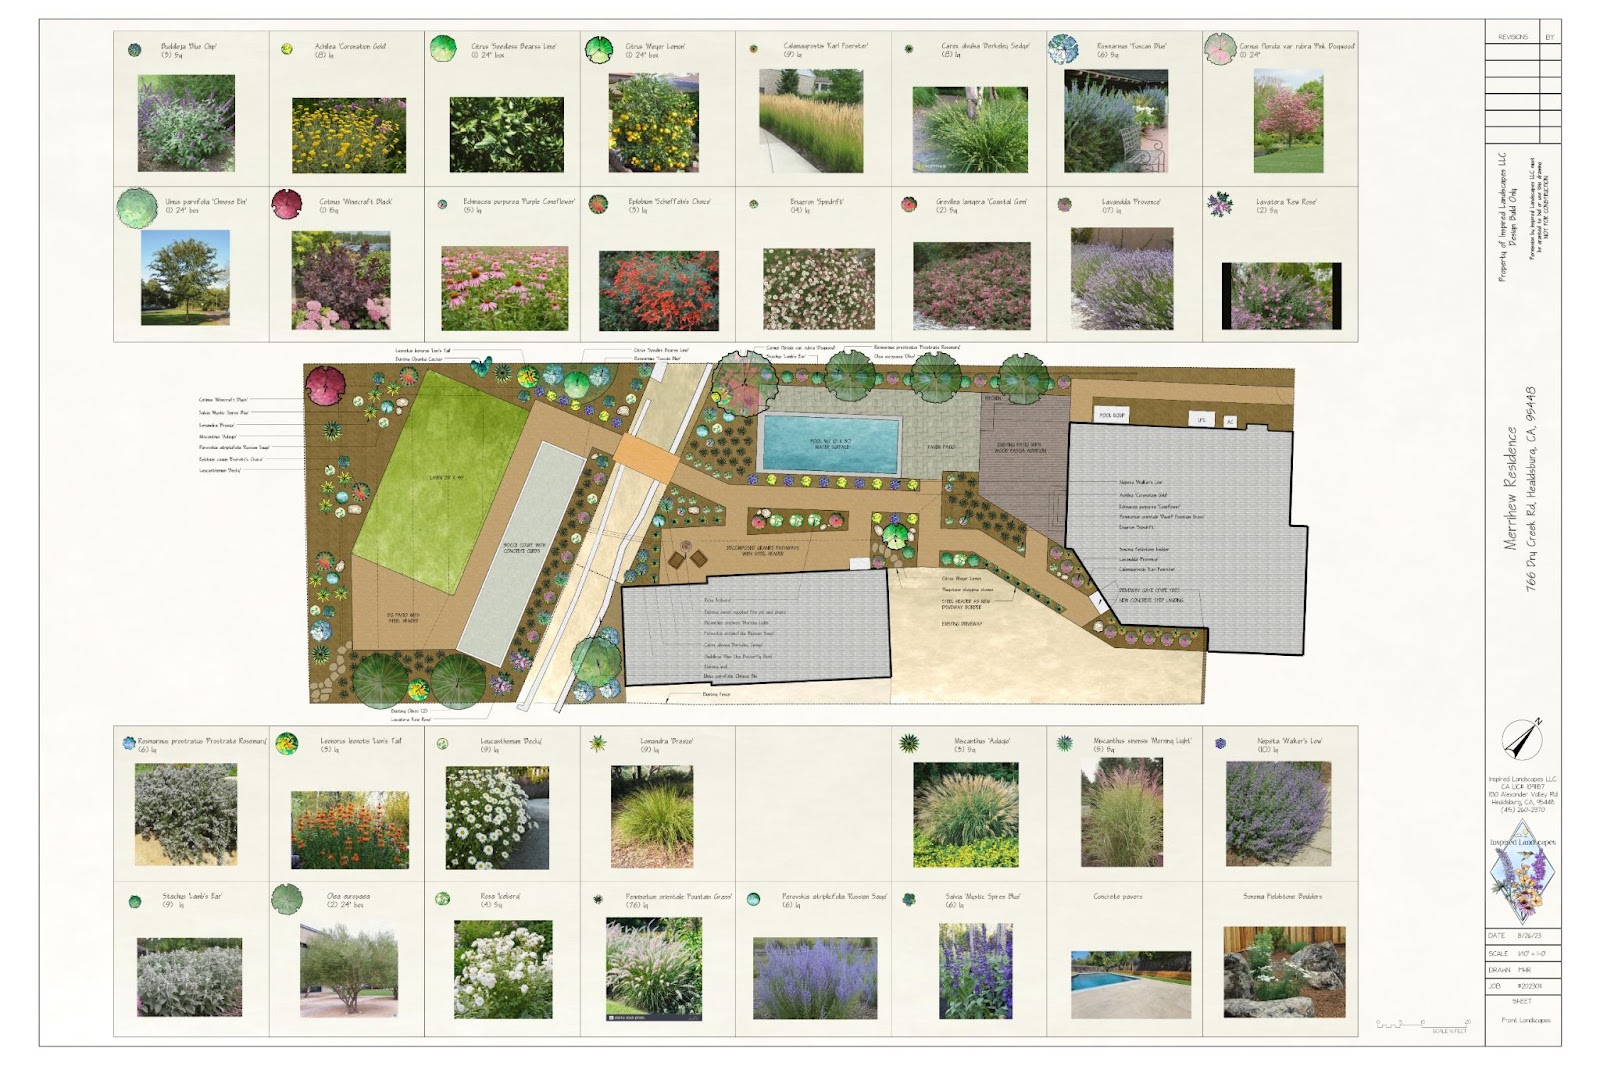 Landscaping design plan with a variety of sample plants, bushes and flowers in boxes around the edge.